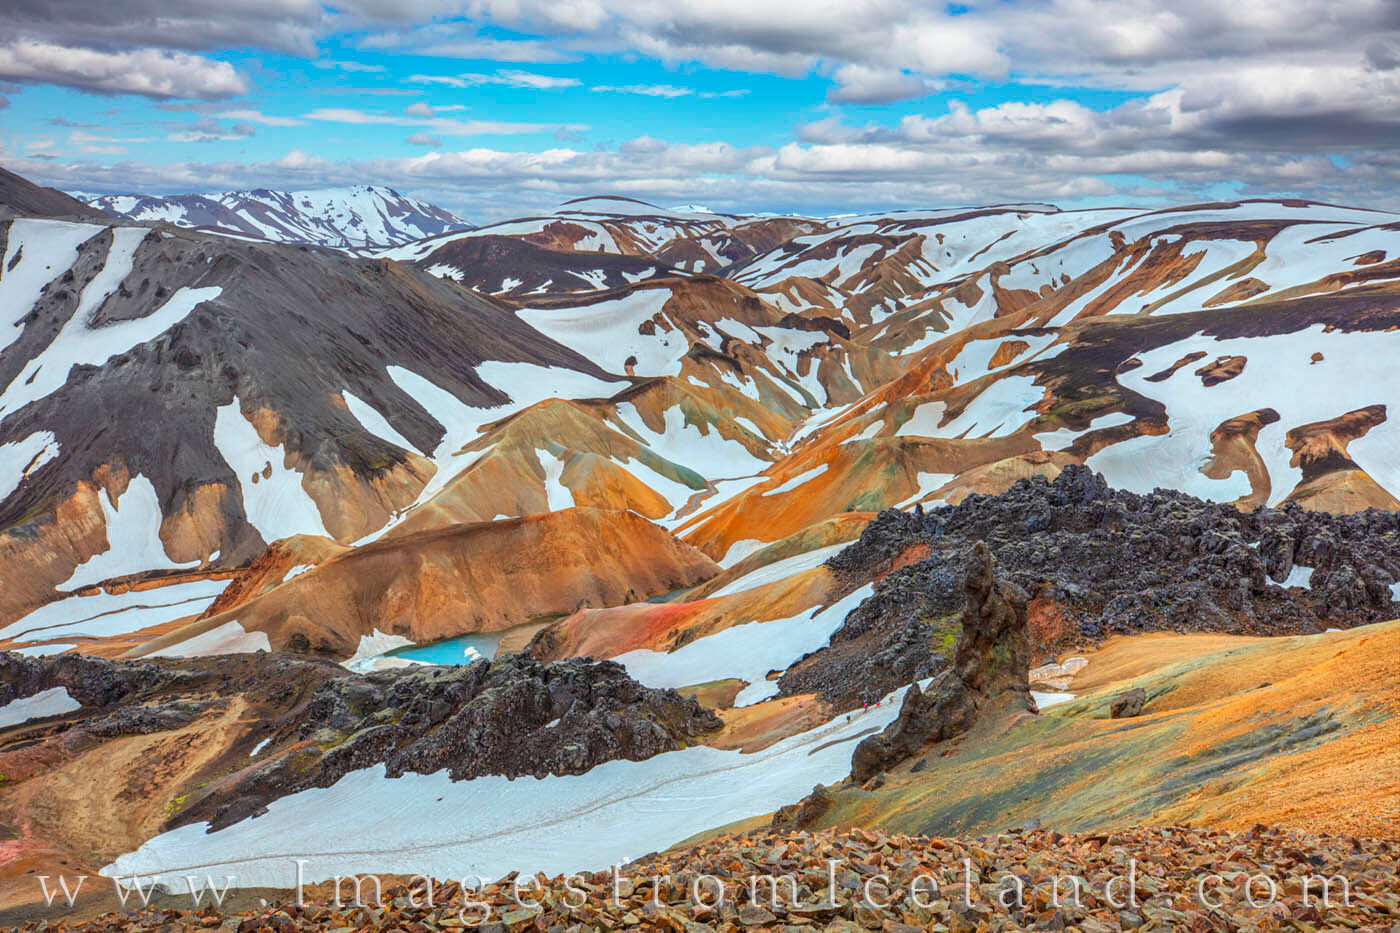 Brennisteinsalda is one of the jewels of the Landmannalaugar in the Iceland Highlands.